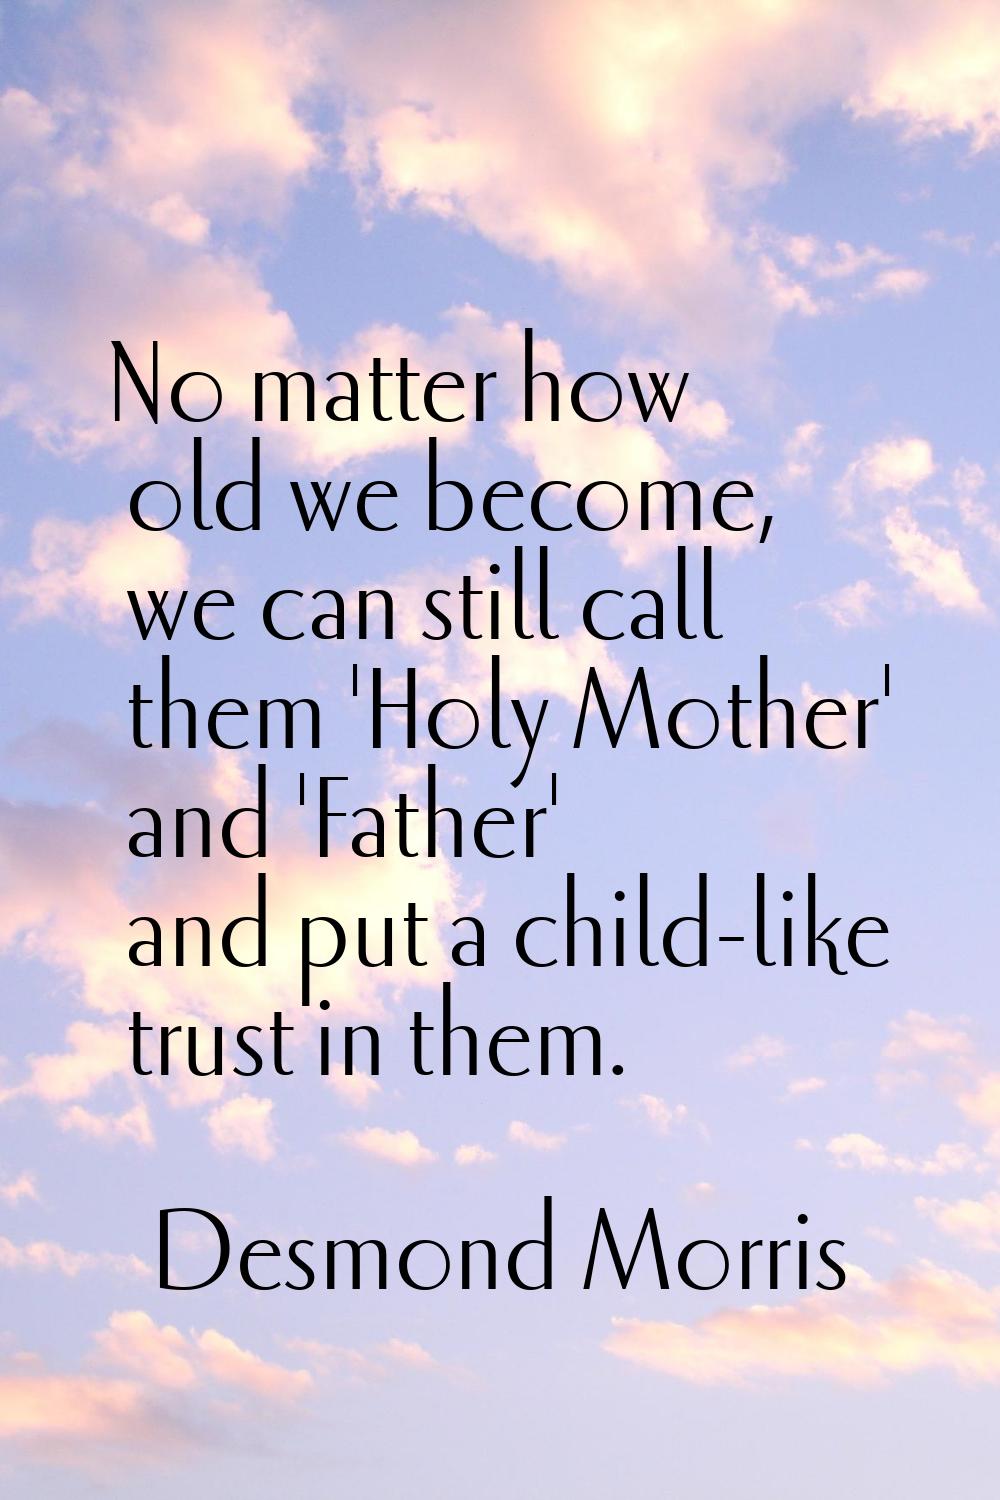 No matter how old we become, we can still call them 'Holy Mother' and 'Father' and put a child-like